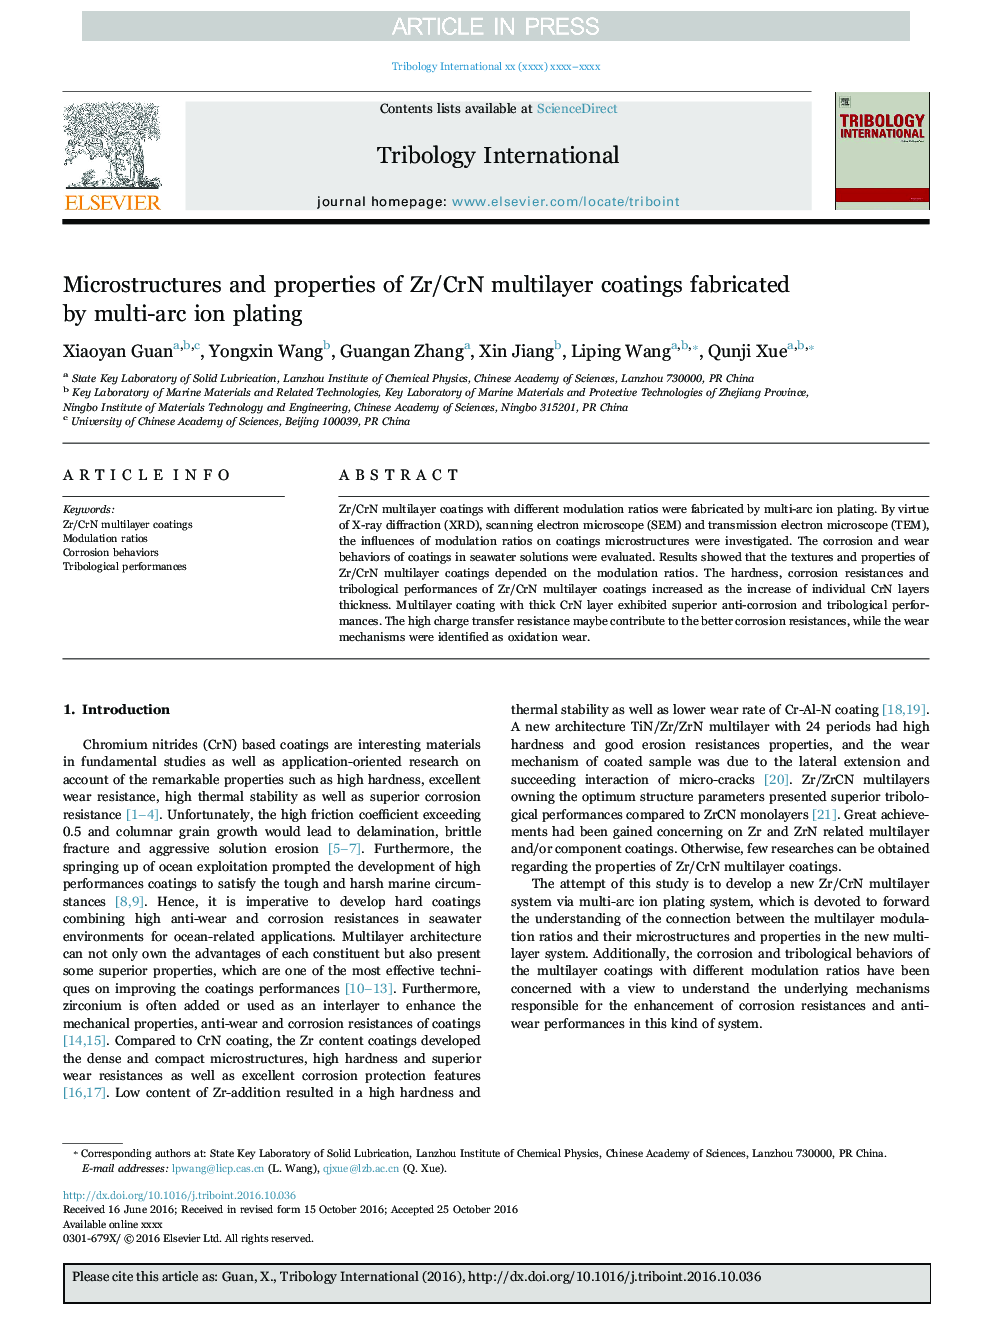 Microstructures and properties of Zr/CrN multilayer coatings fabricated by multi-arc ion plating